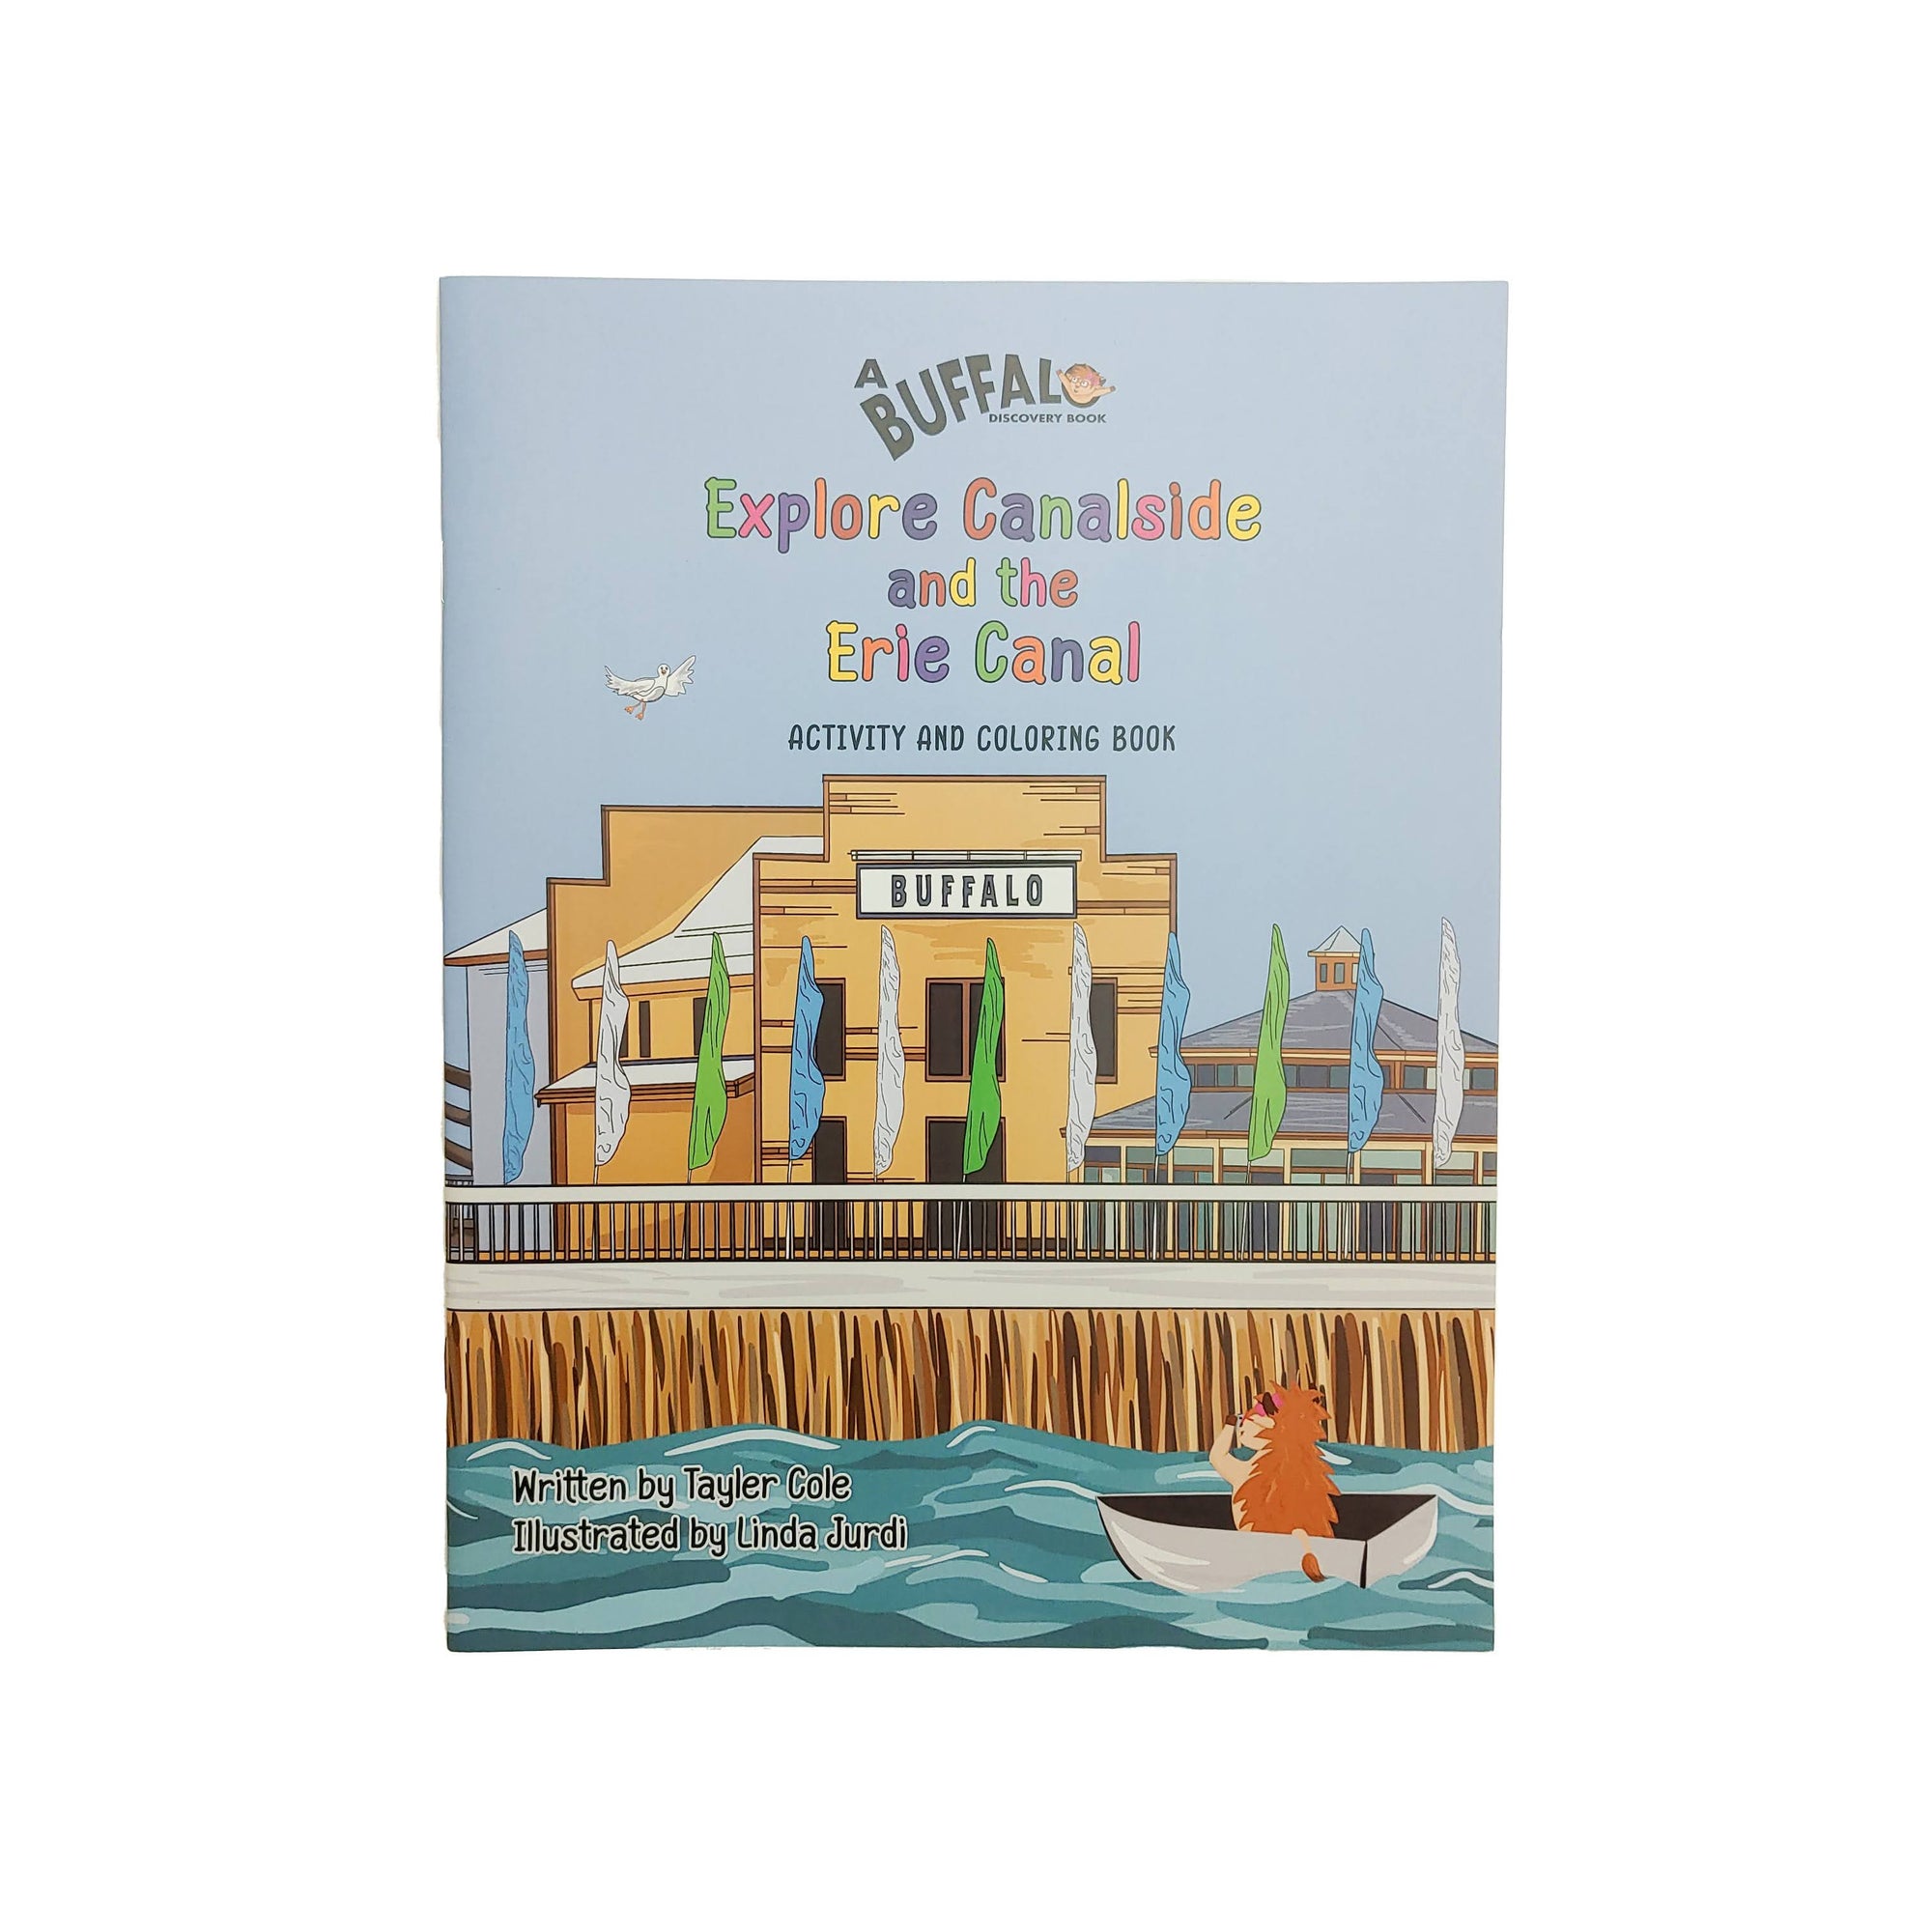 bflo store a buffalo discovery book explore canalside and the erie canal activity and coloring book